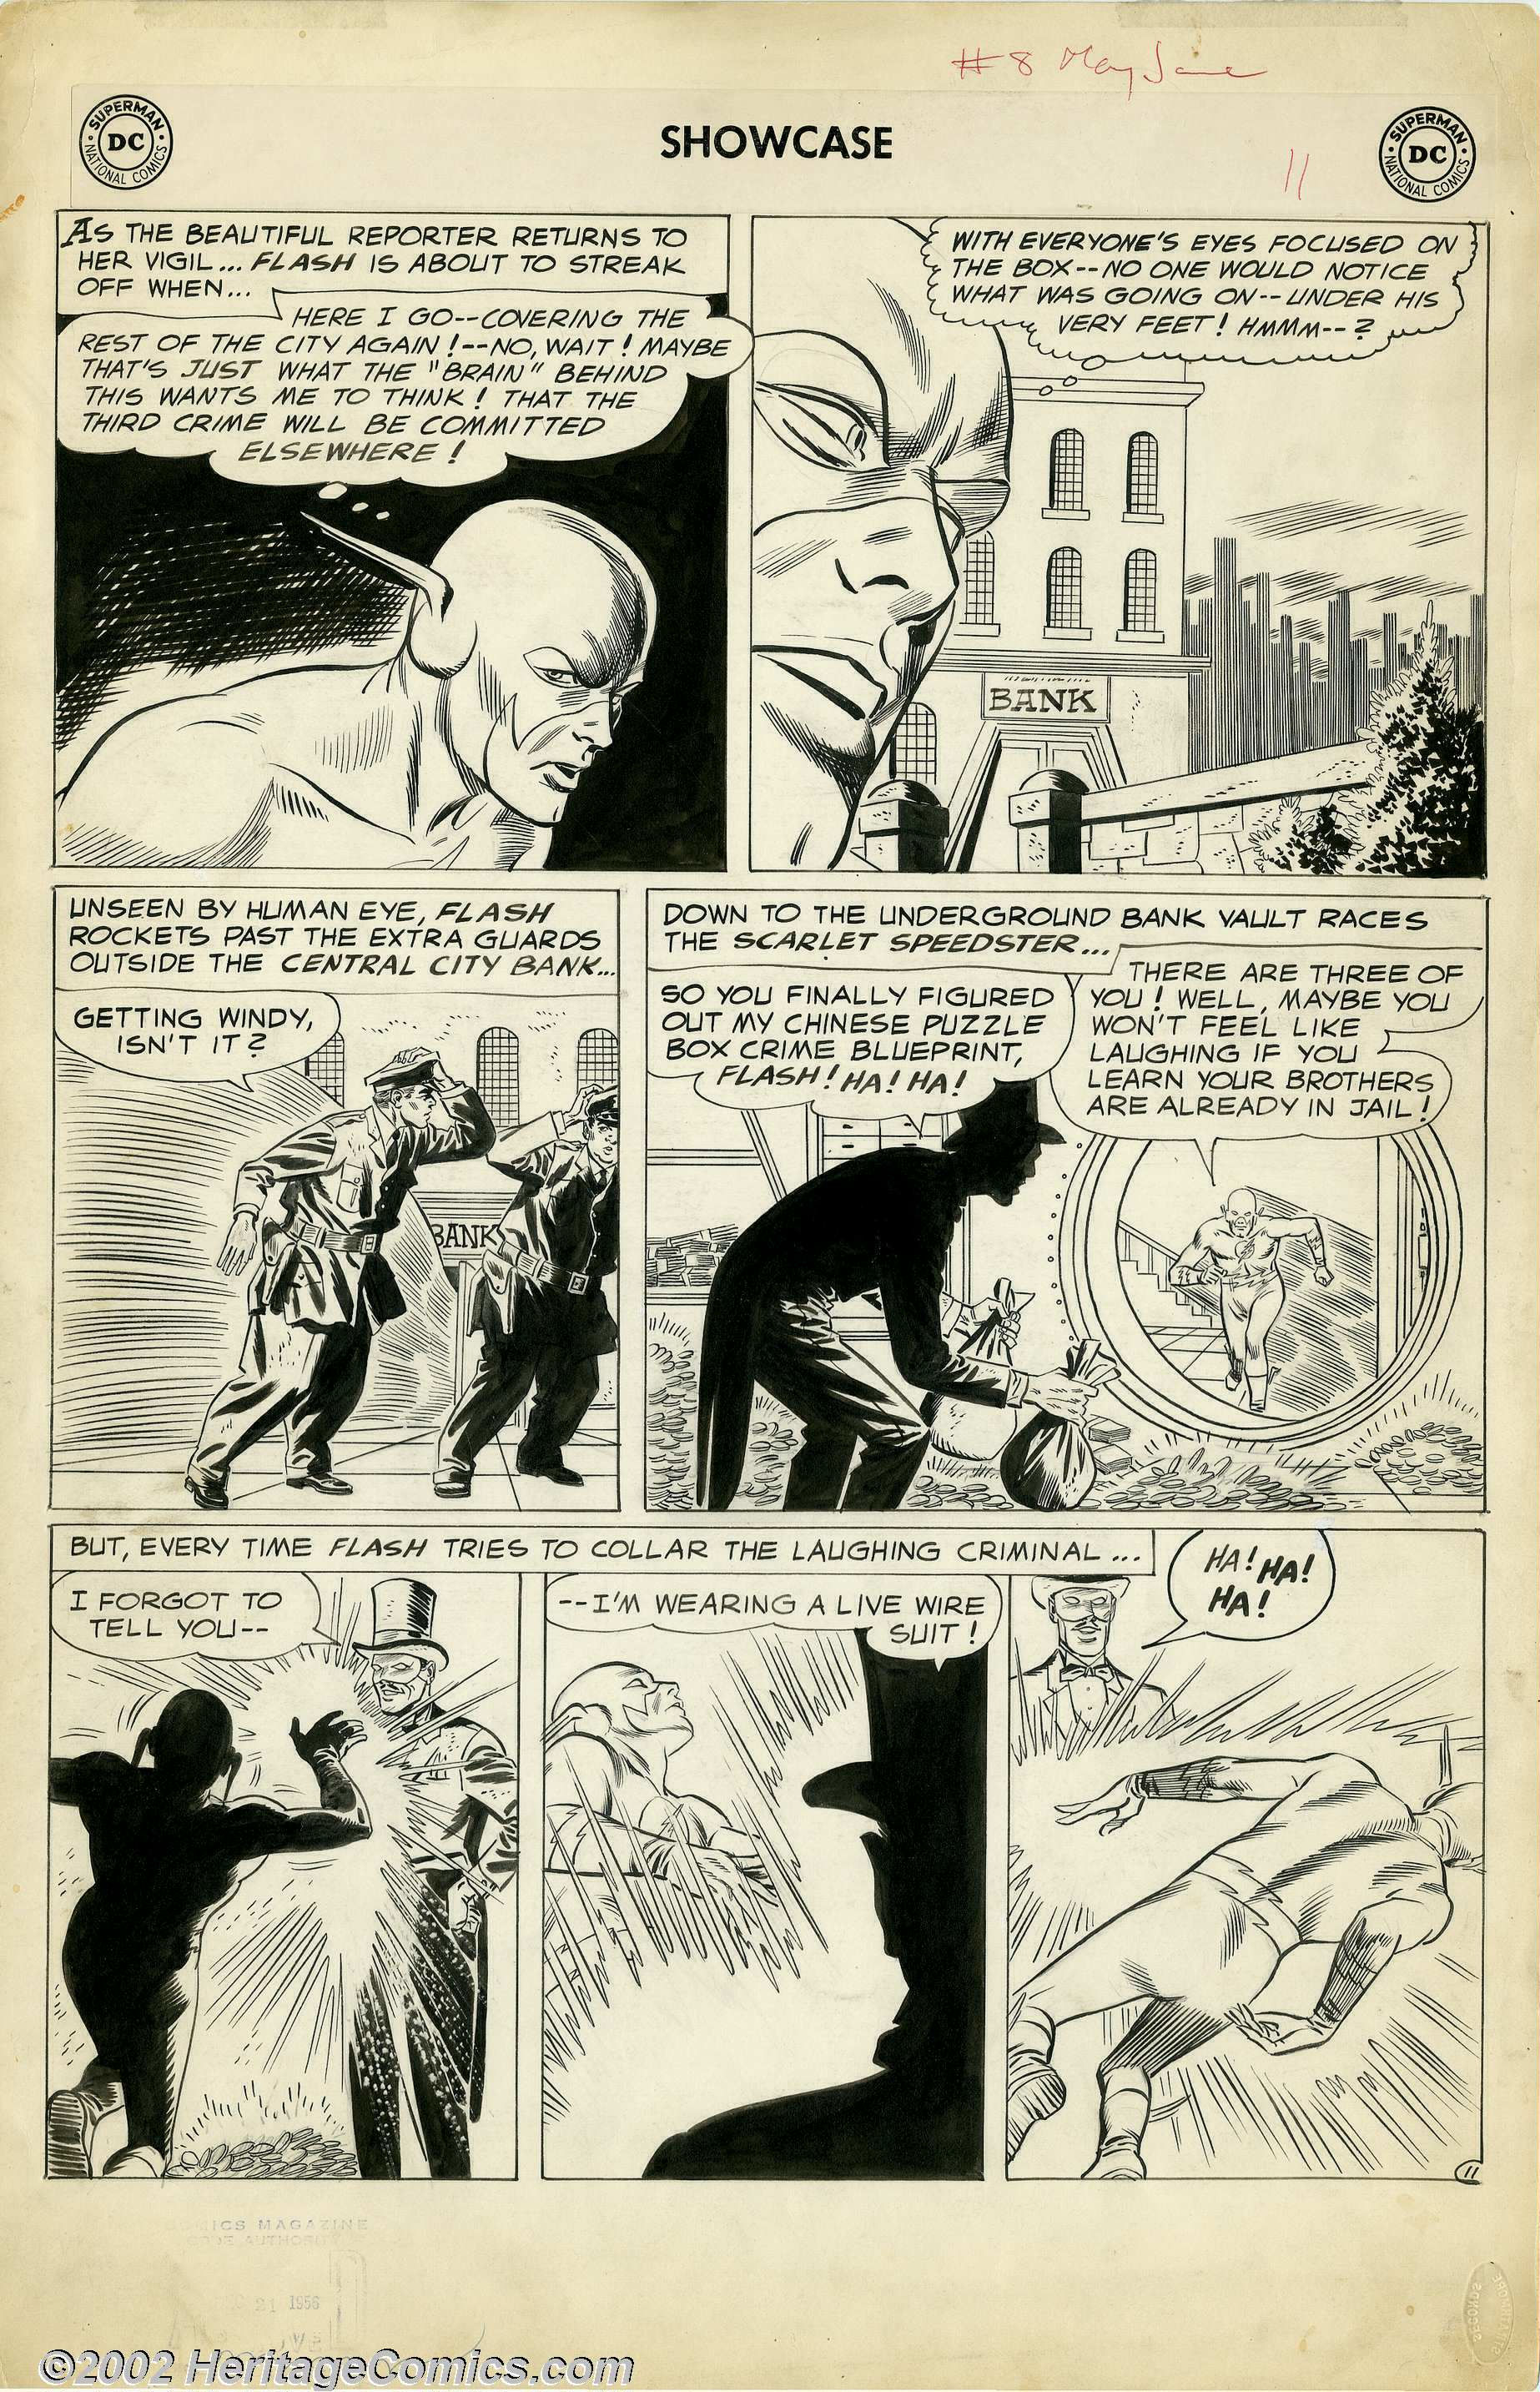 Original Art for Showcase #8 by Carmine Infantino Sold for: $5,893